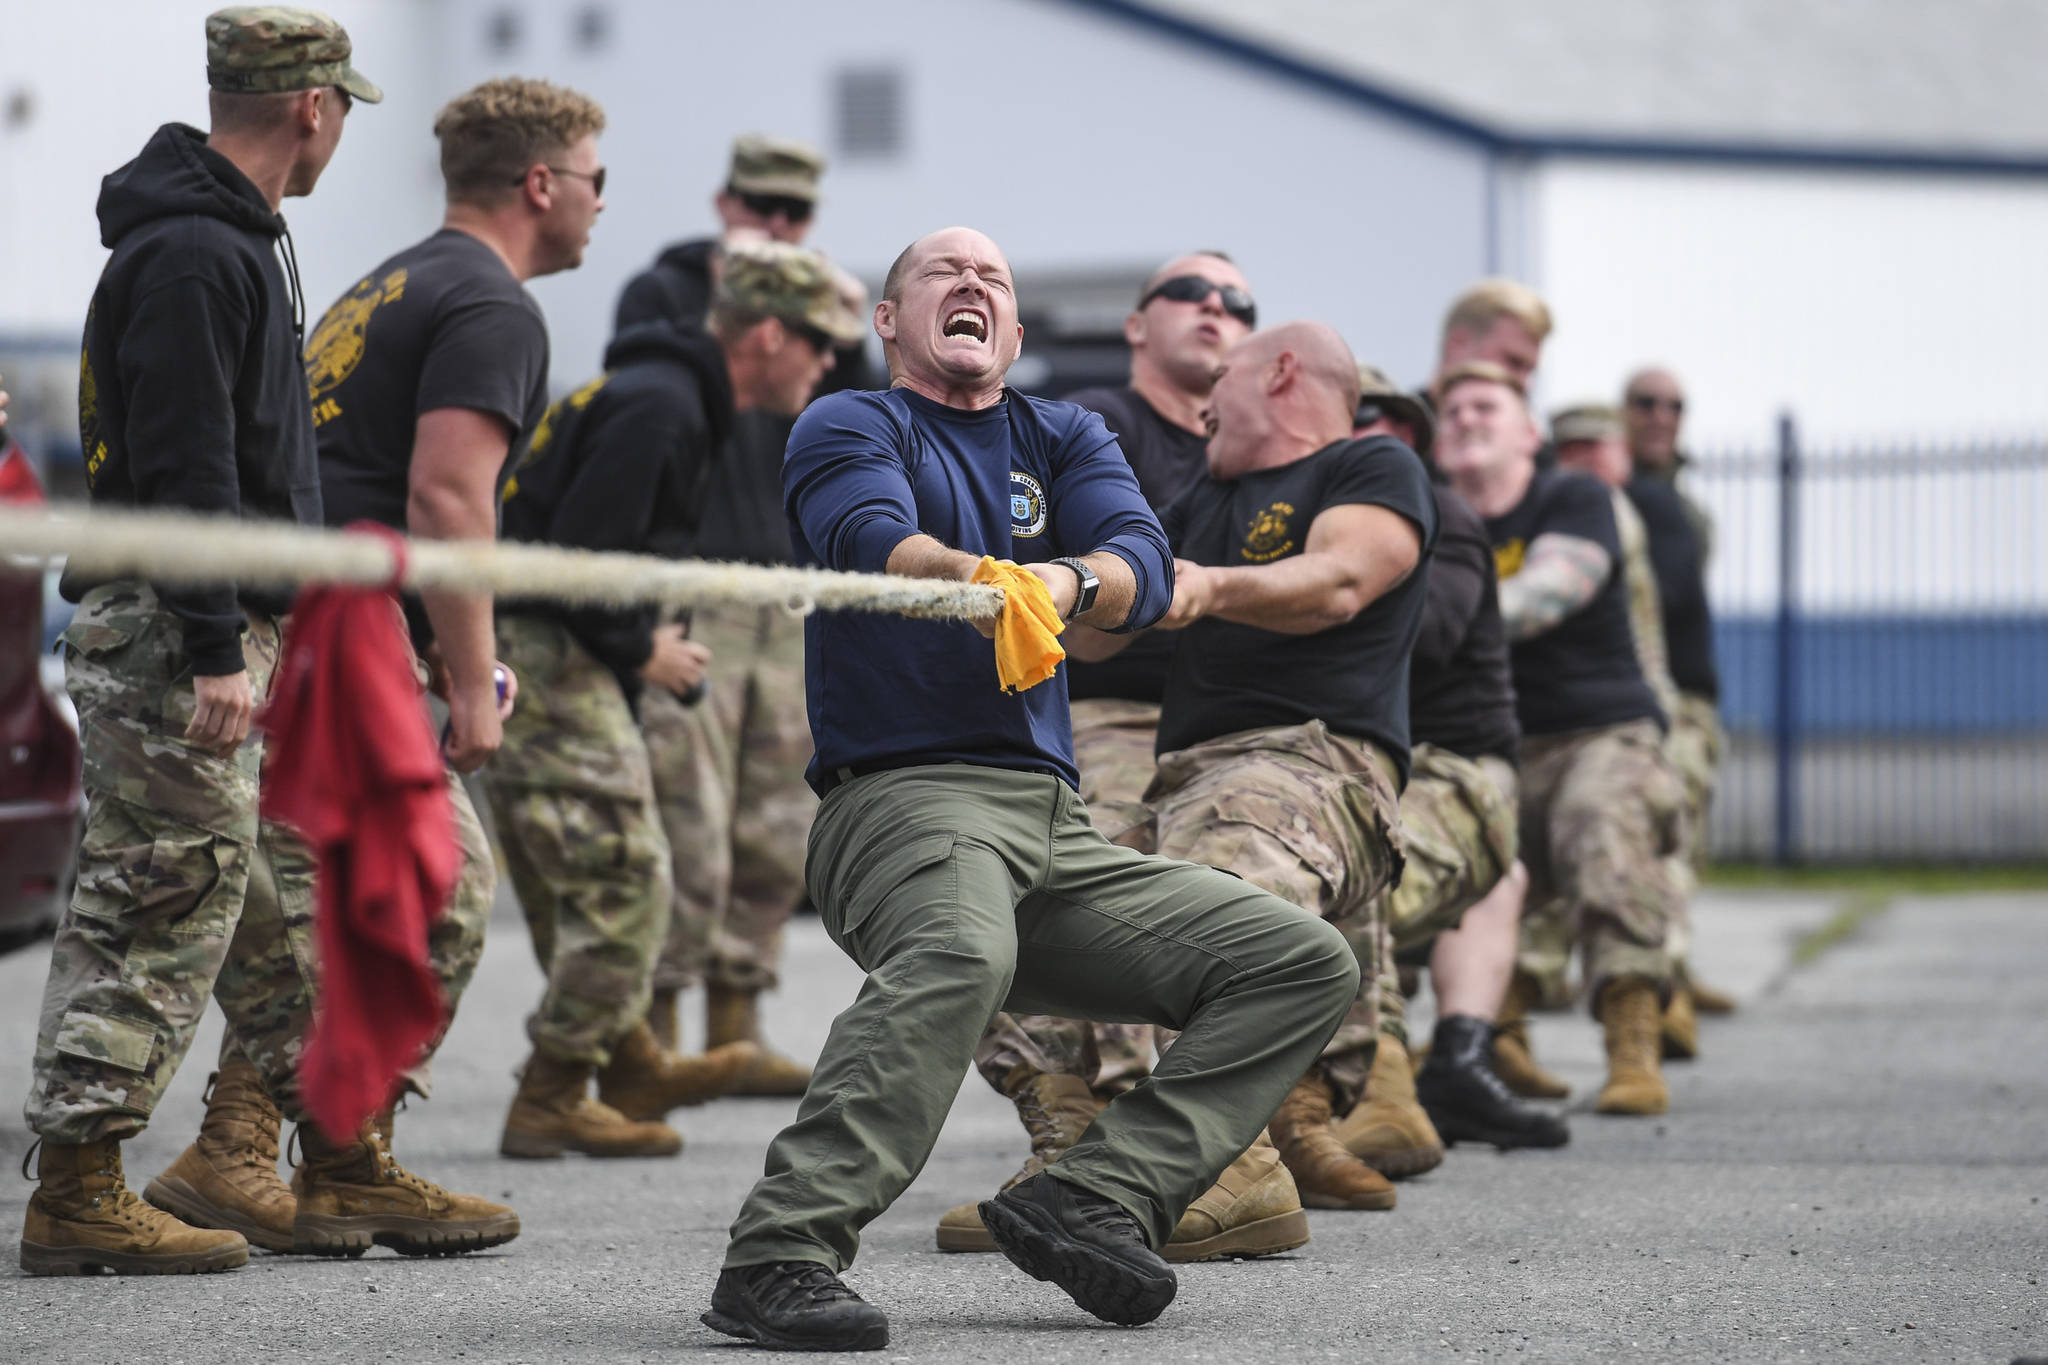 Shawn Price, of the U.S. Army Dive Team, fronts his team during the annual Buoy Tender Olympics at Station Juneau on Wednesday, Aug. 21, 2019. (Michael Penn | Juneau Empire)